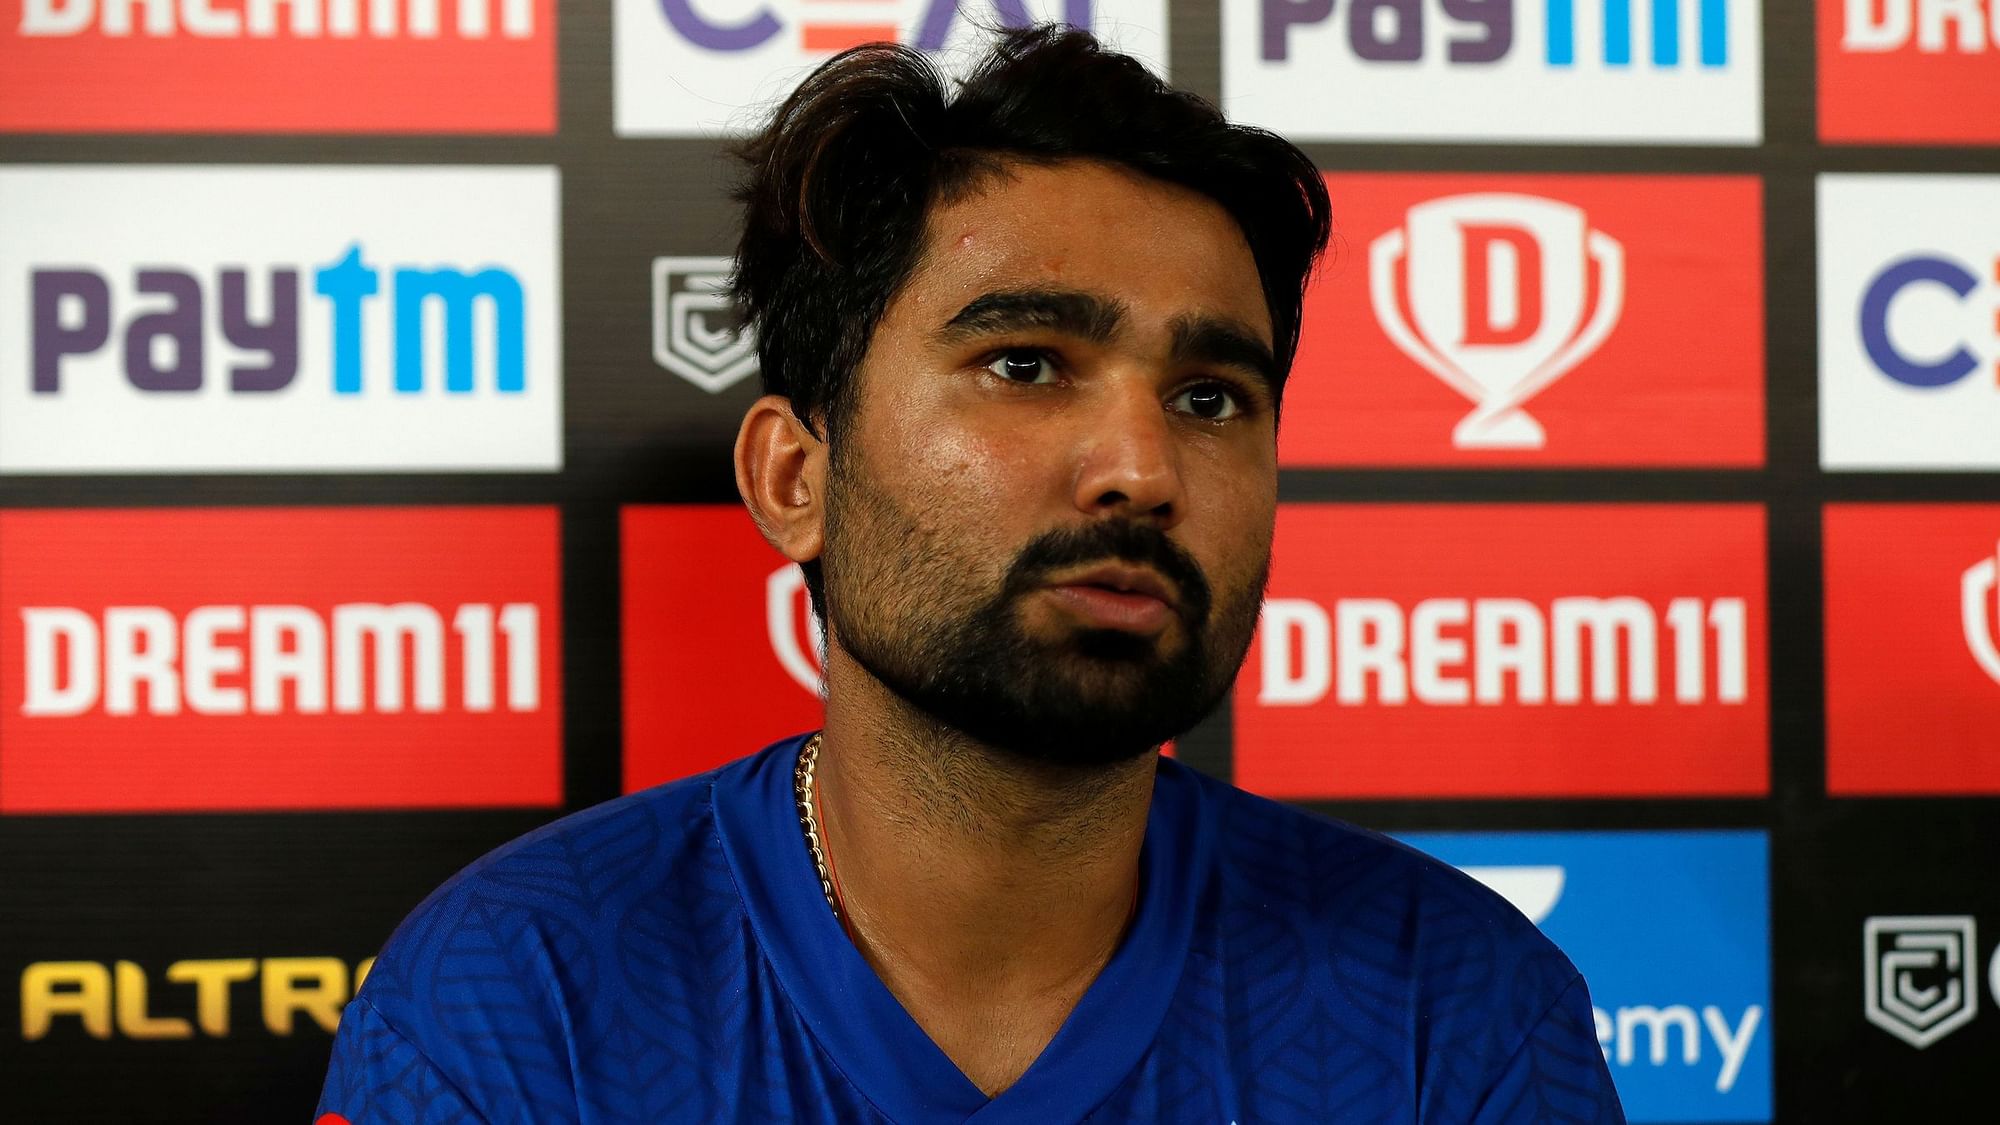 Rajasthan Royals’ Rahul Tewatia was happy with the confidence the management has shown in him